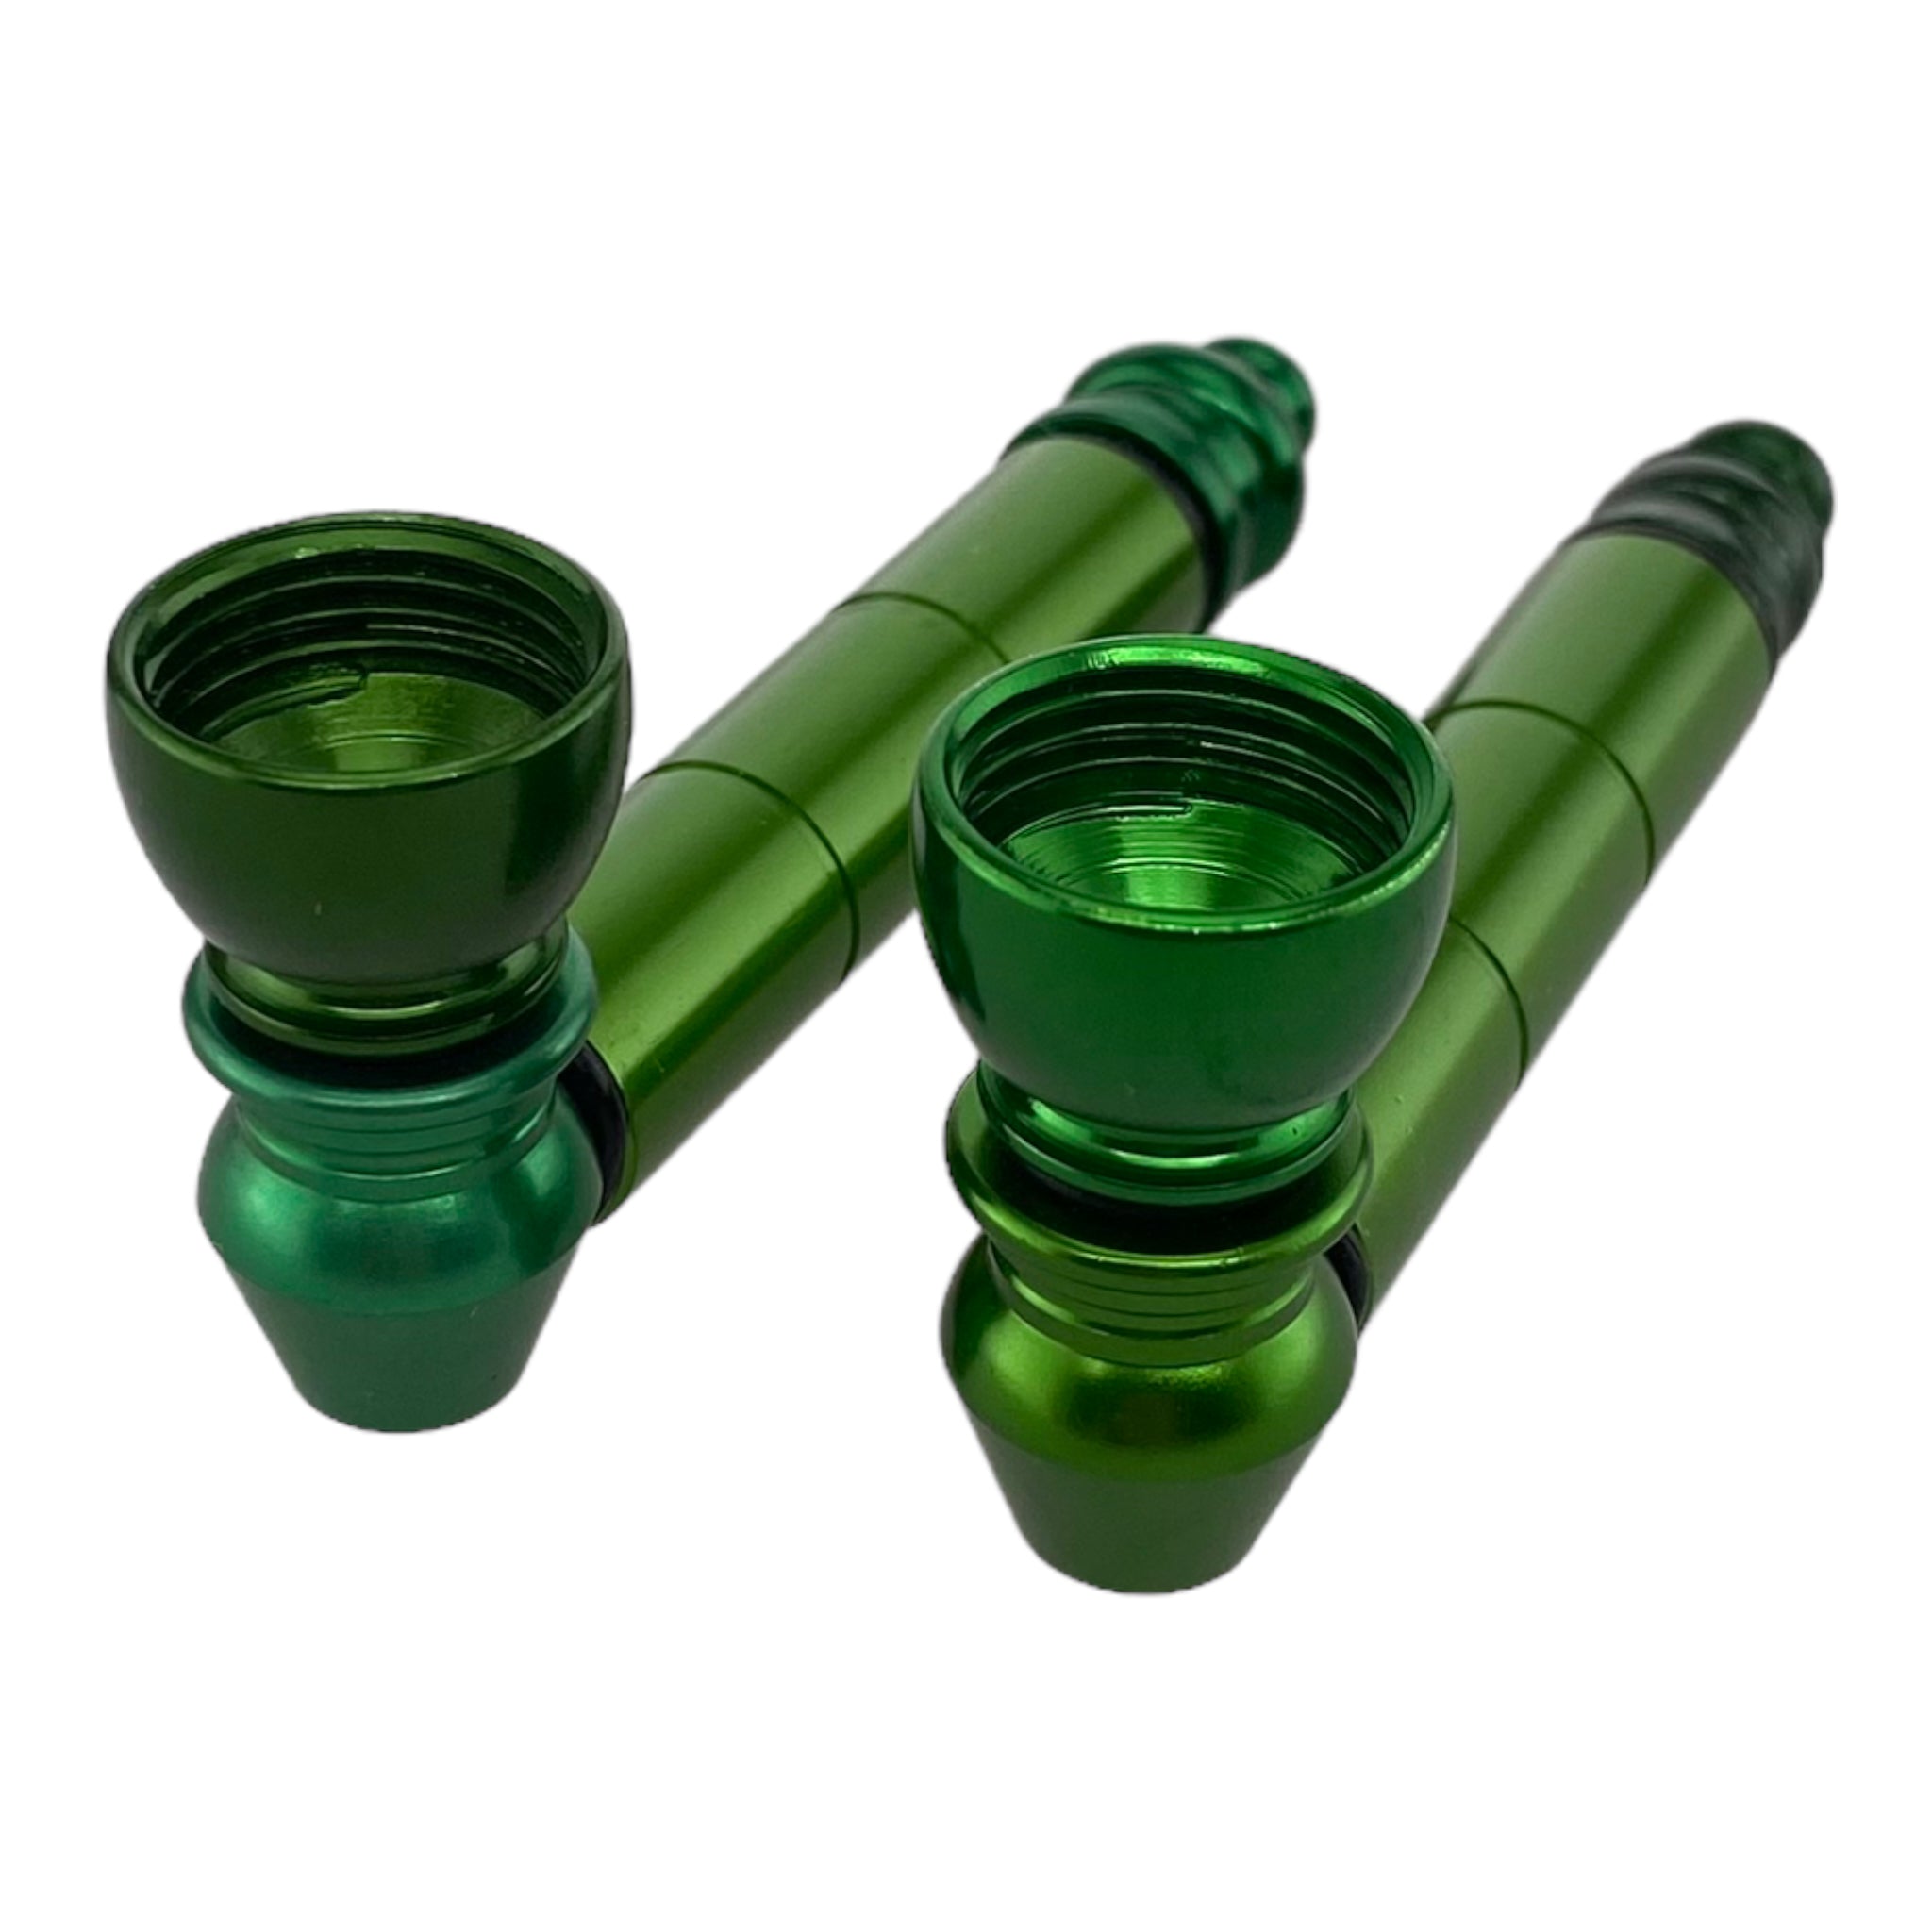 Green Basic Metal smoking Pipe With Small Chamber Bundle 2 Pipes And 10ct Screens